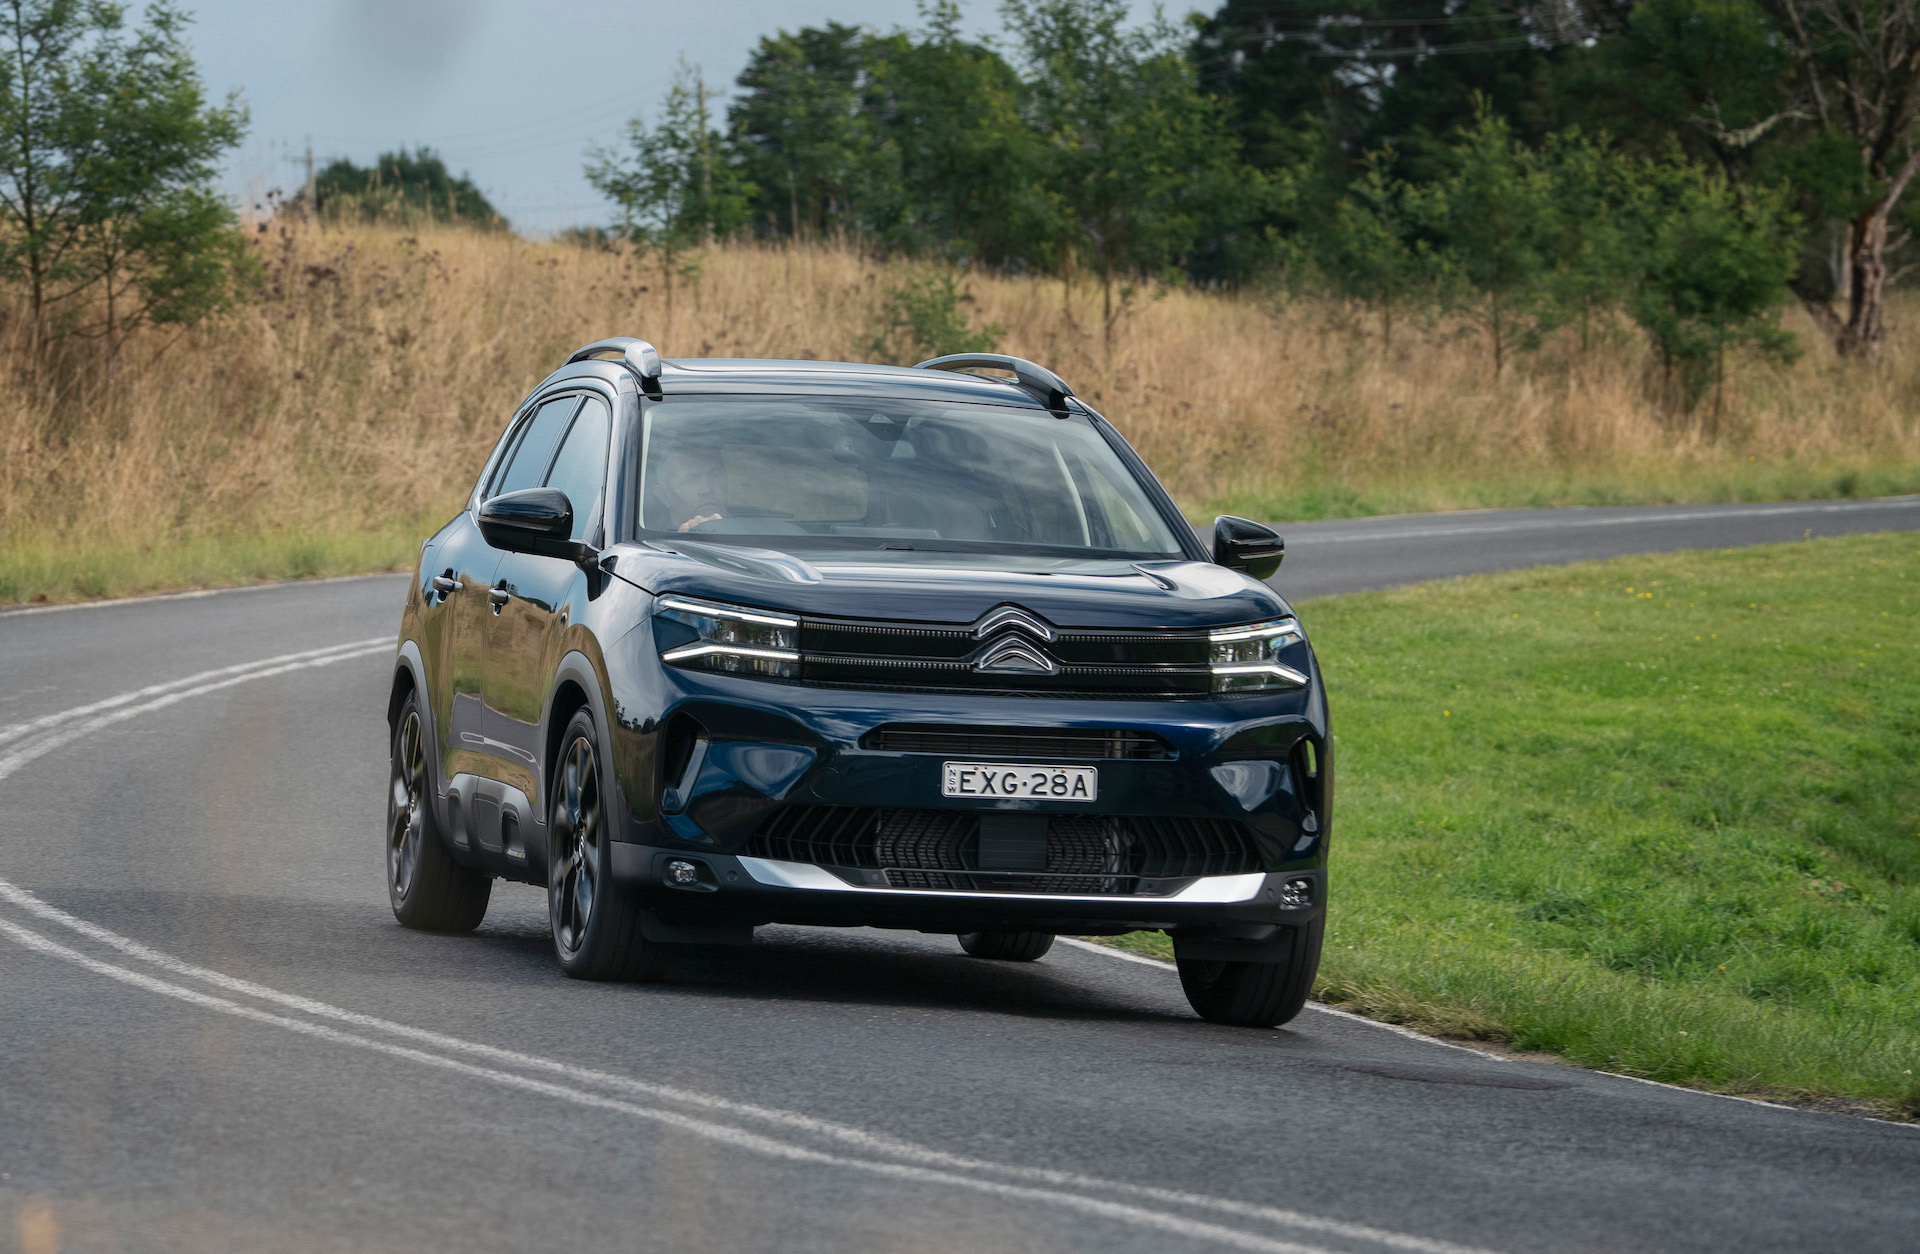 Citroen C5 Aircross Sport on sale in Australia, priced from $54,990